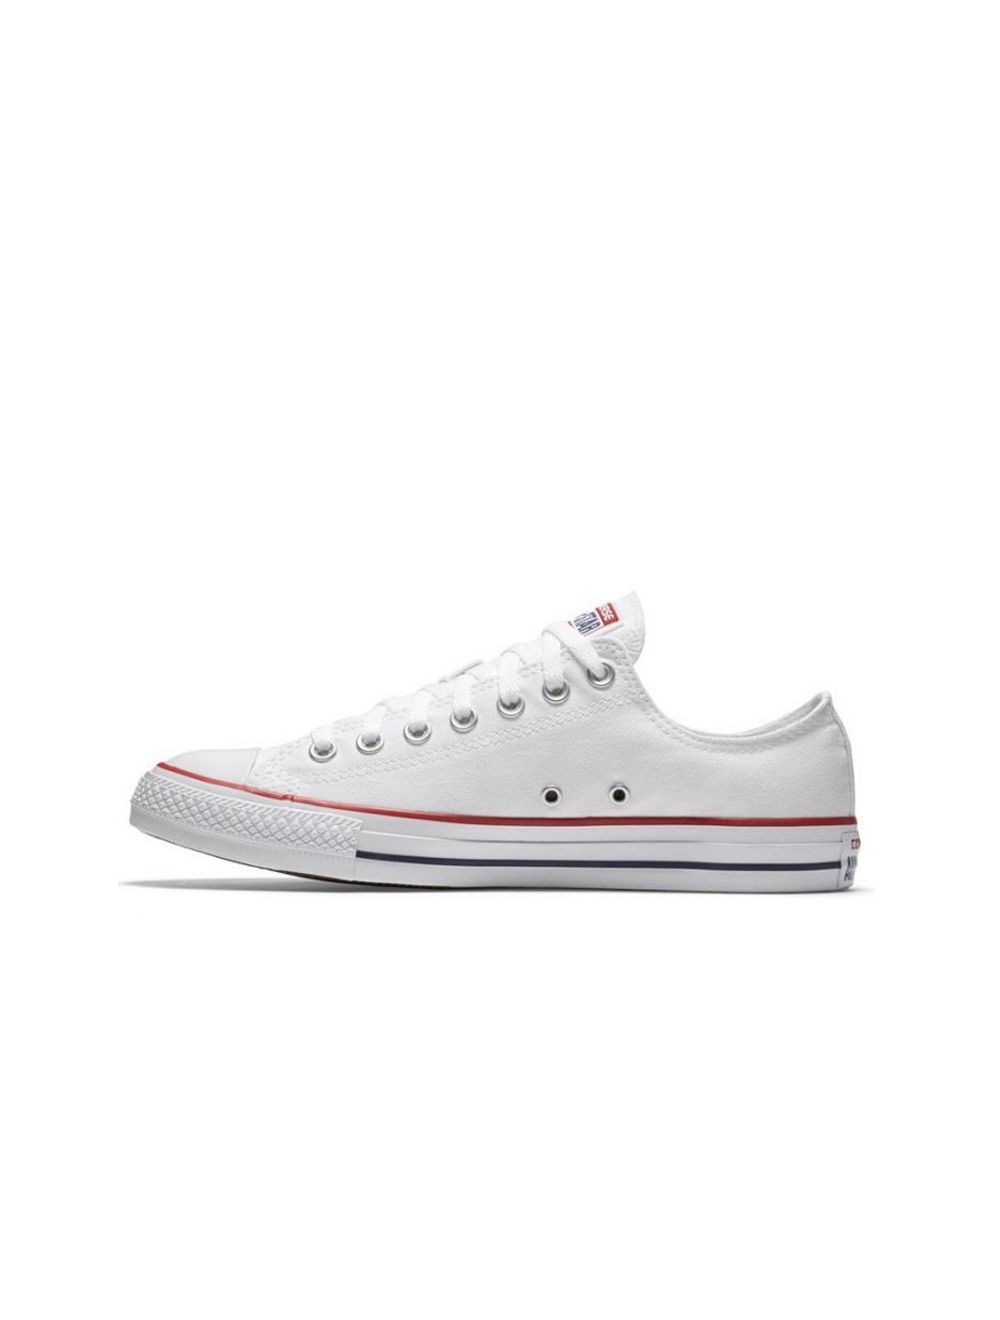 white converse with star on side